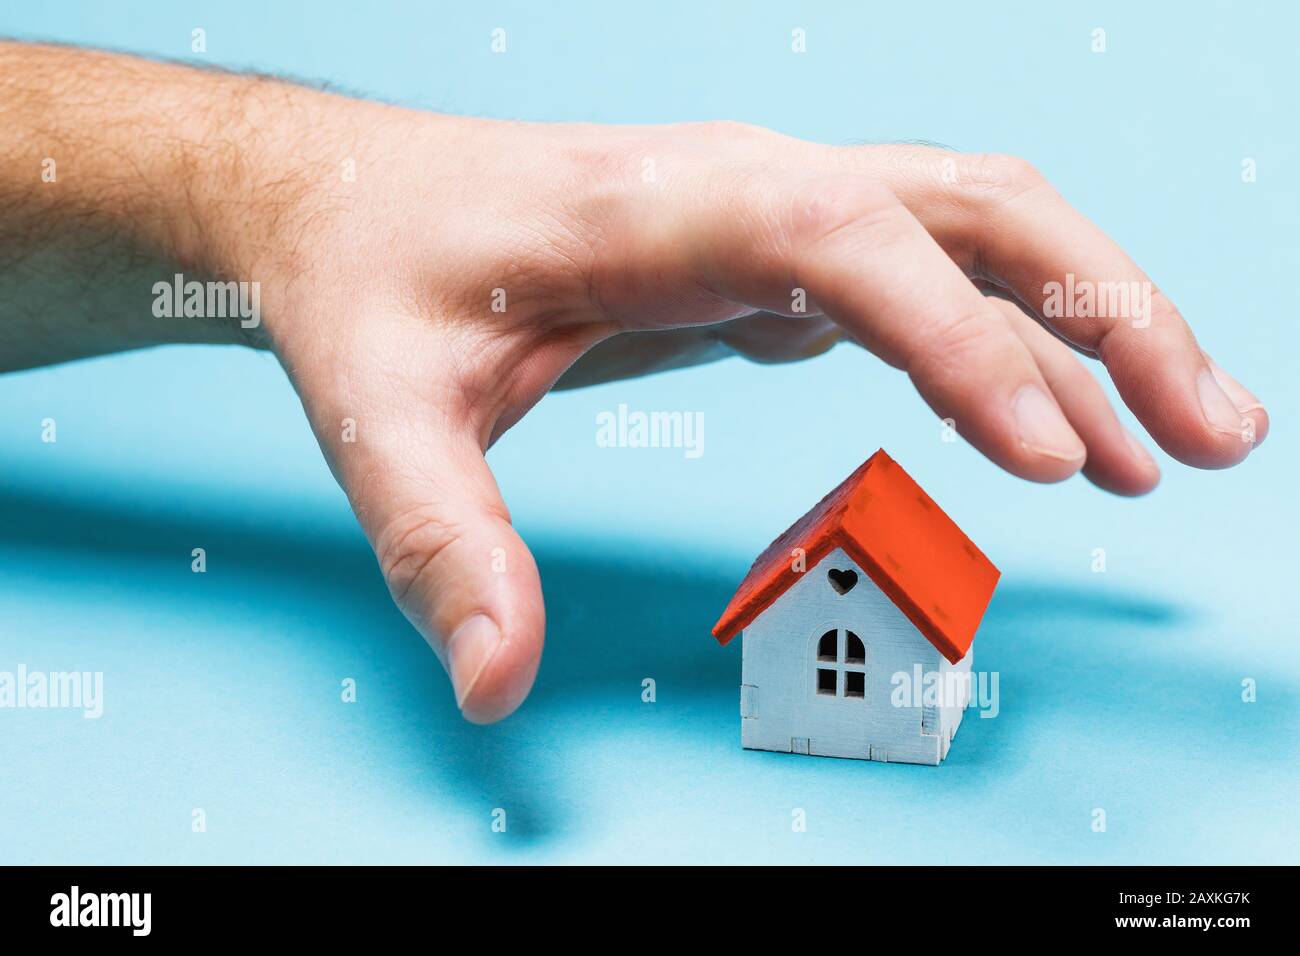 A hand reaches for a toy house. The concept of fraud and theft Stock Photo